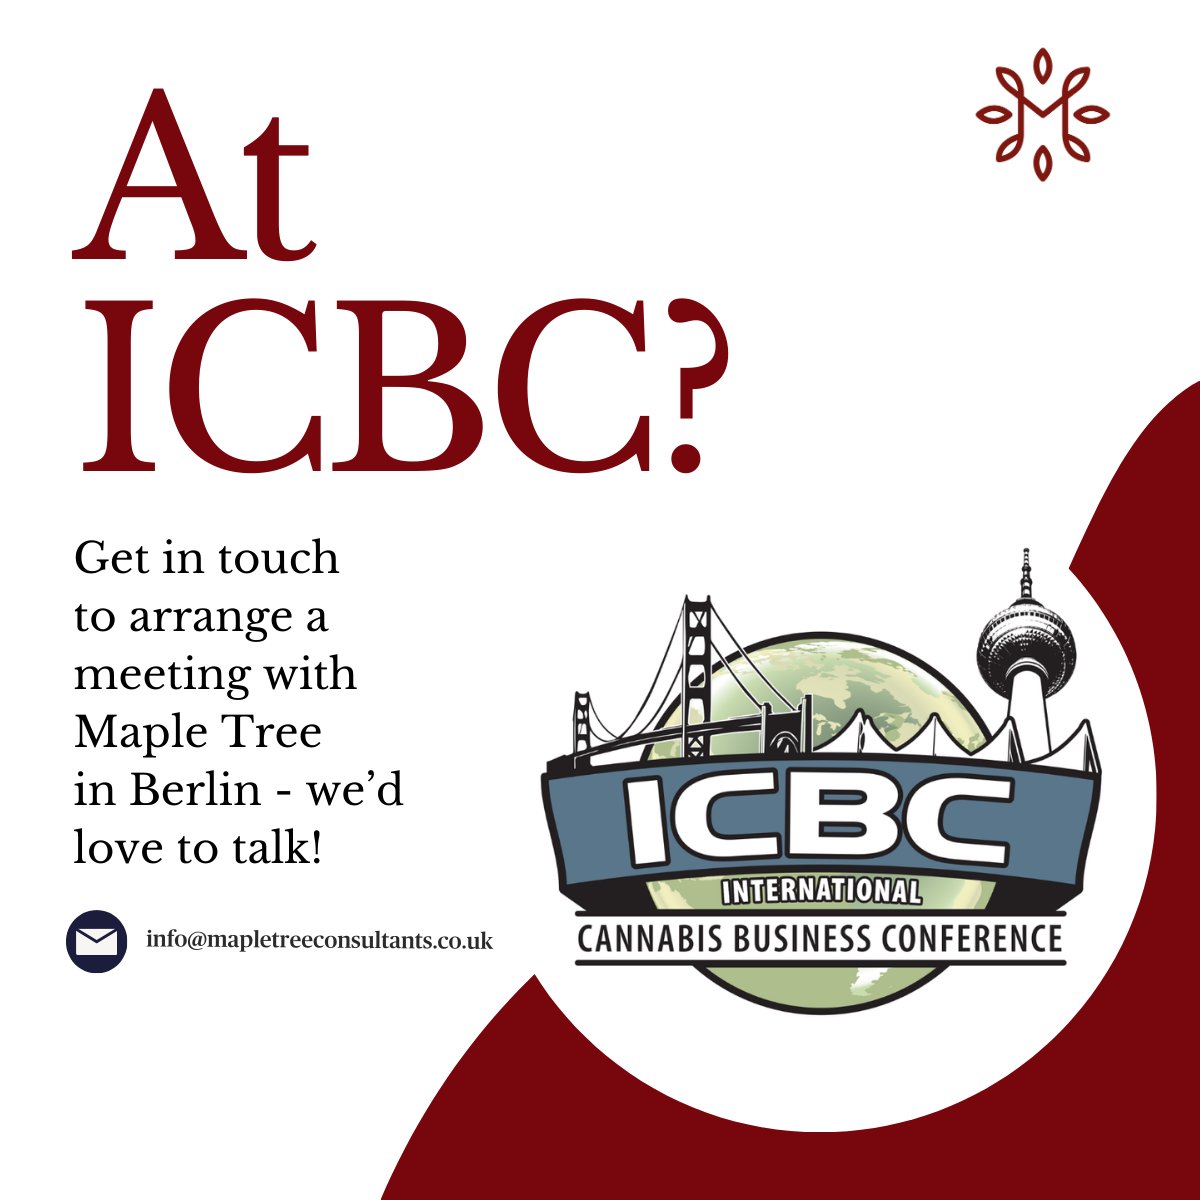 We're delighted to be in Berlin this week #InternationalCBC in Berlin. Will we see you there? We'd love to chat, so please get in touch to arrange a catch up - contact us here or drop us an email at info@mapletreeconsultants.co.uk.